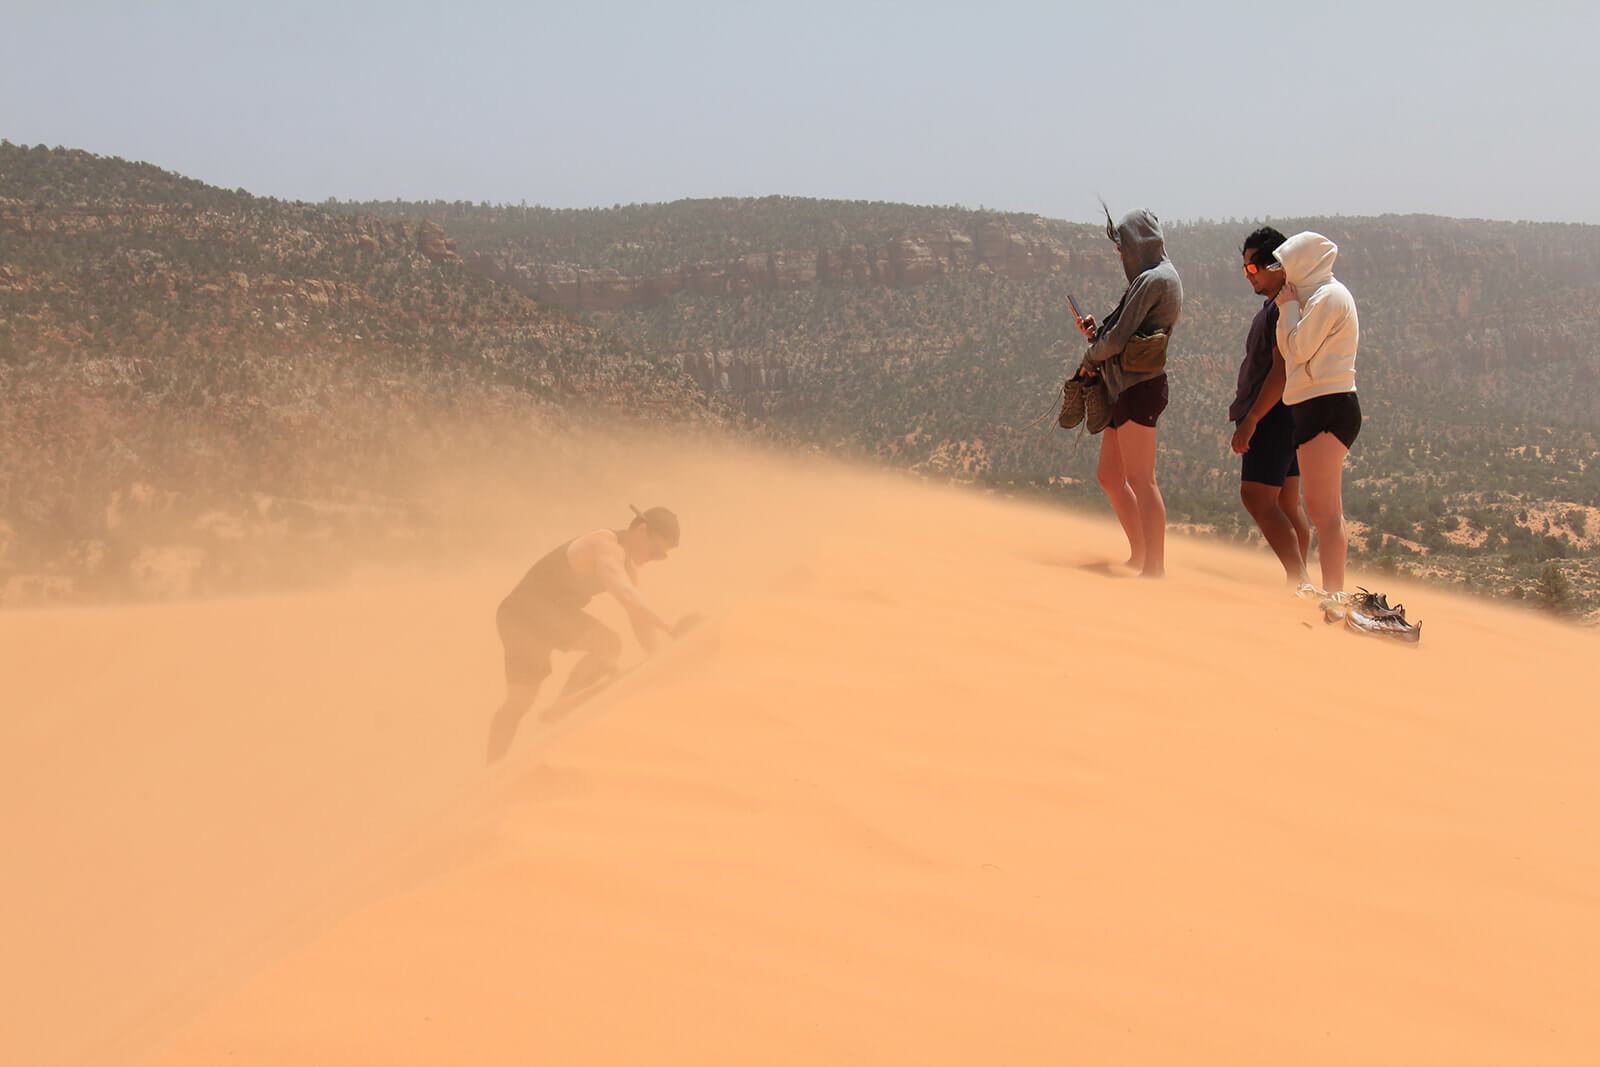 The pink sand dunes, with blowing winds and four people enjoying the view.